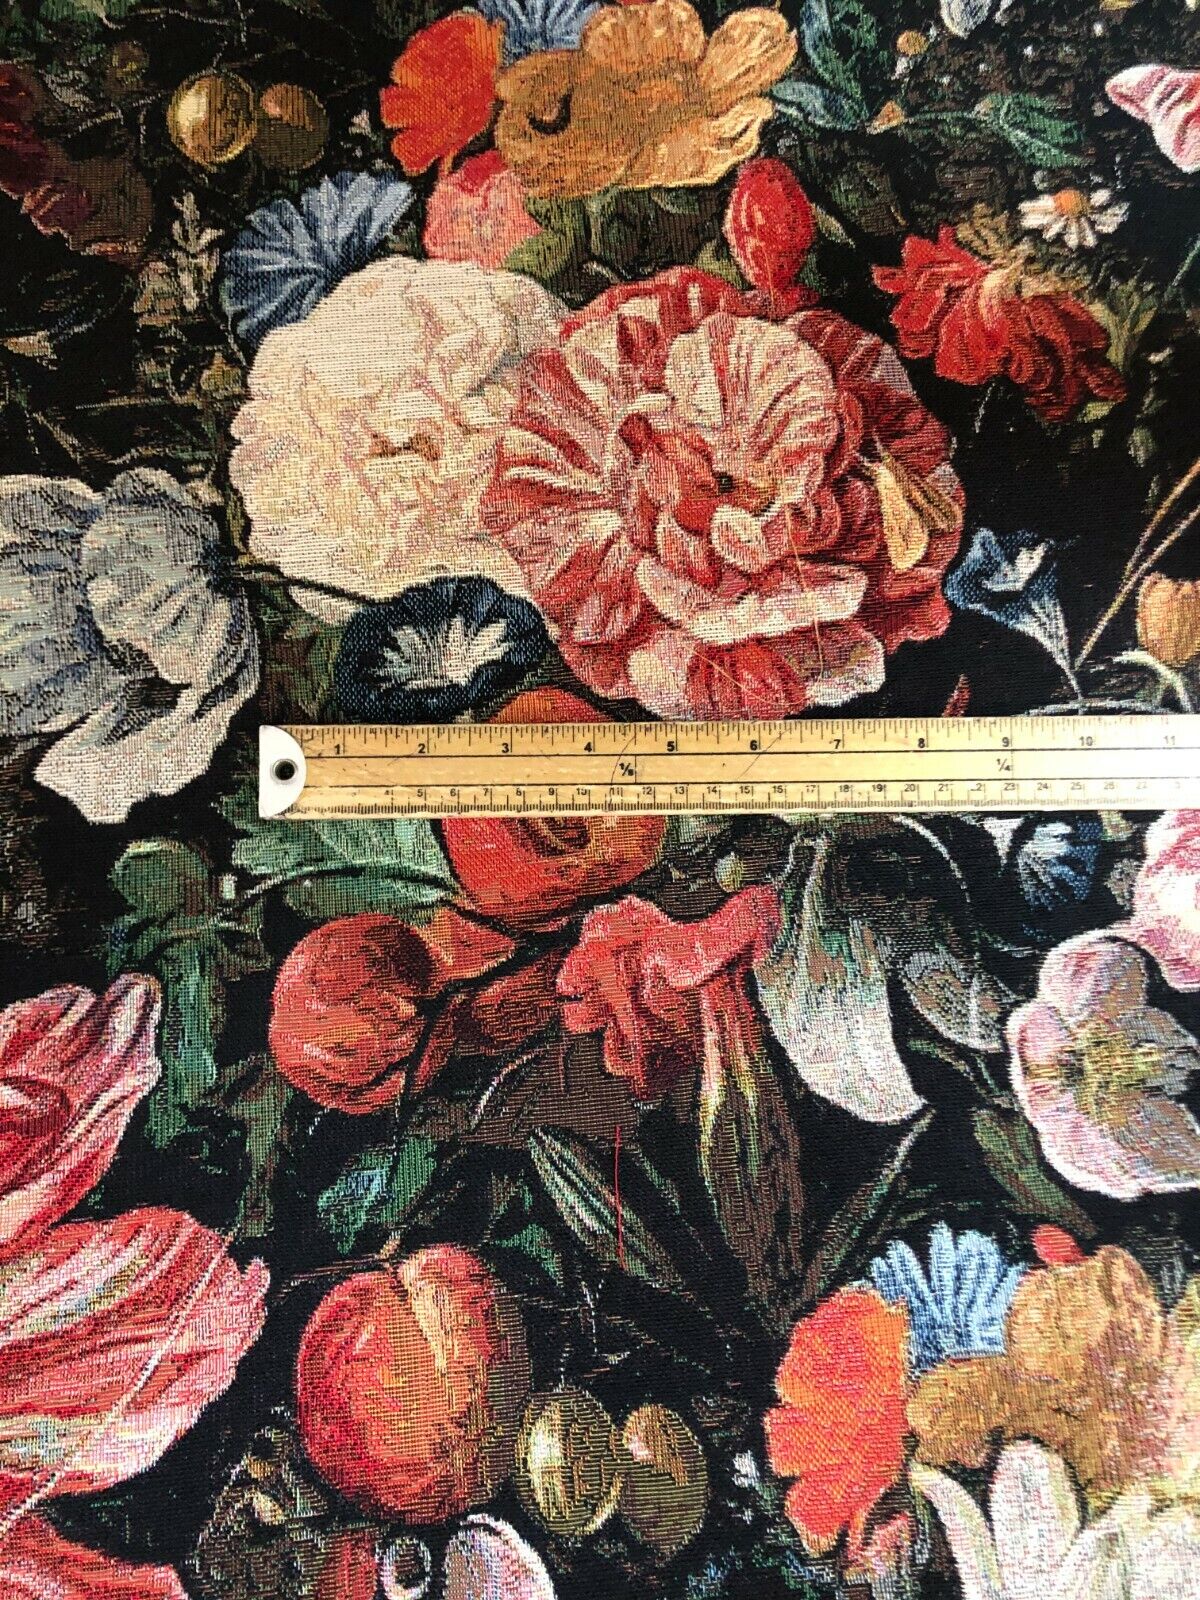 Pink Roses: Upholstery Fabric by the Meter